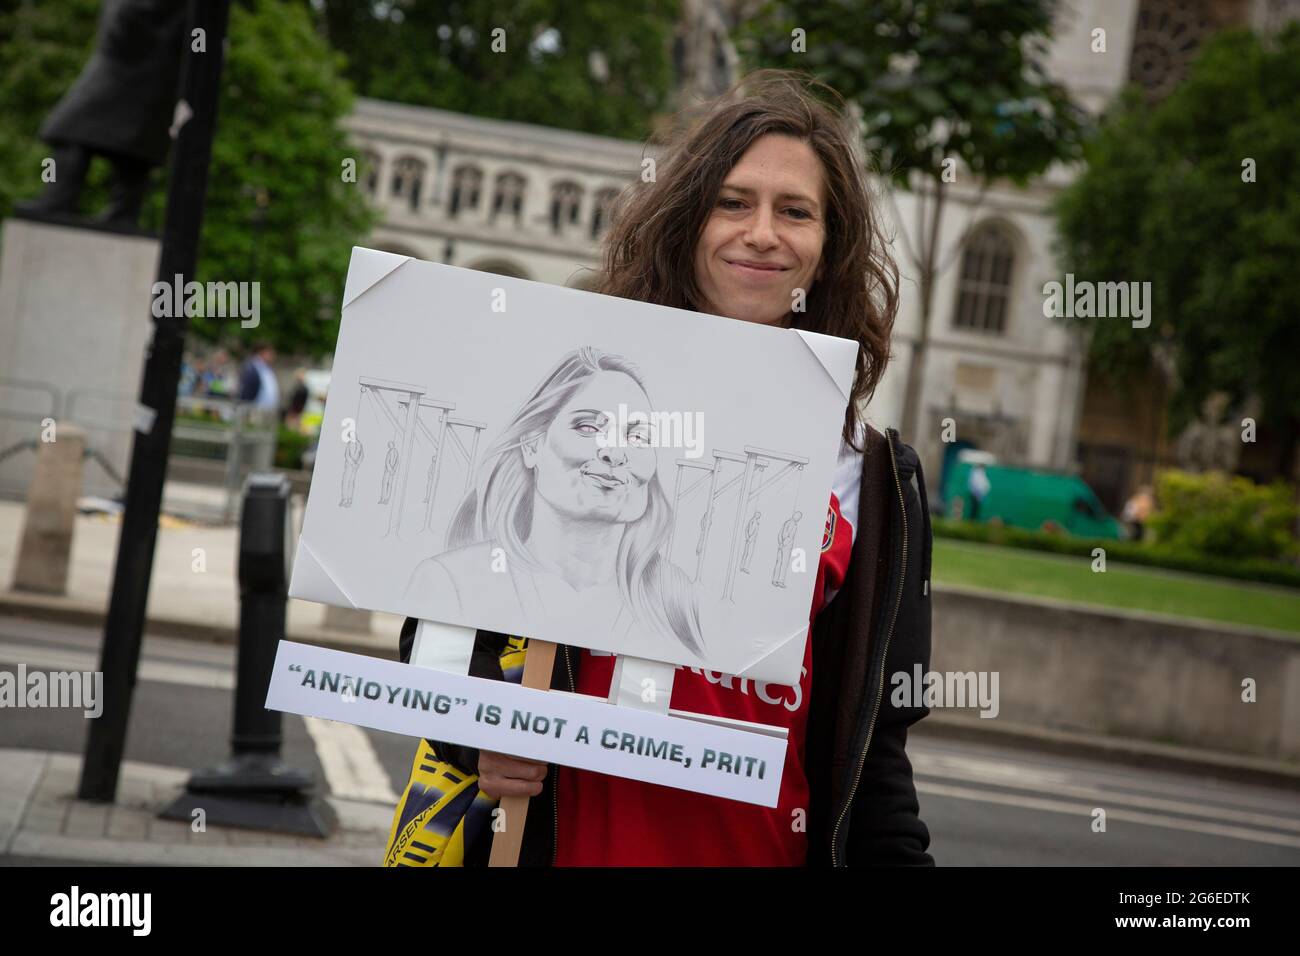 'Annoying' is not a crime, Priti. - A protester against Home Secretary Priti Patel from the group Sodem Action on Parliament Square. Stock Photo